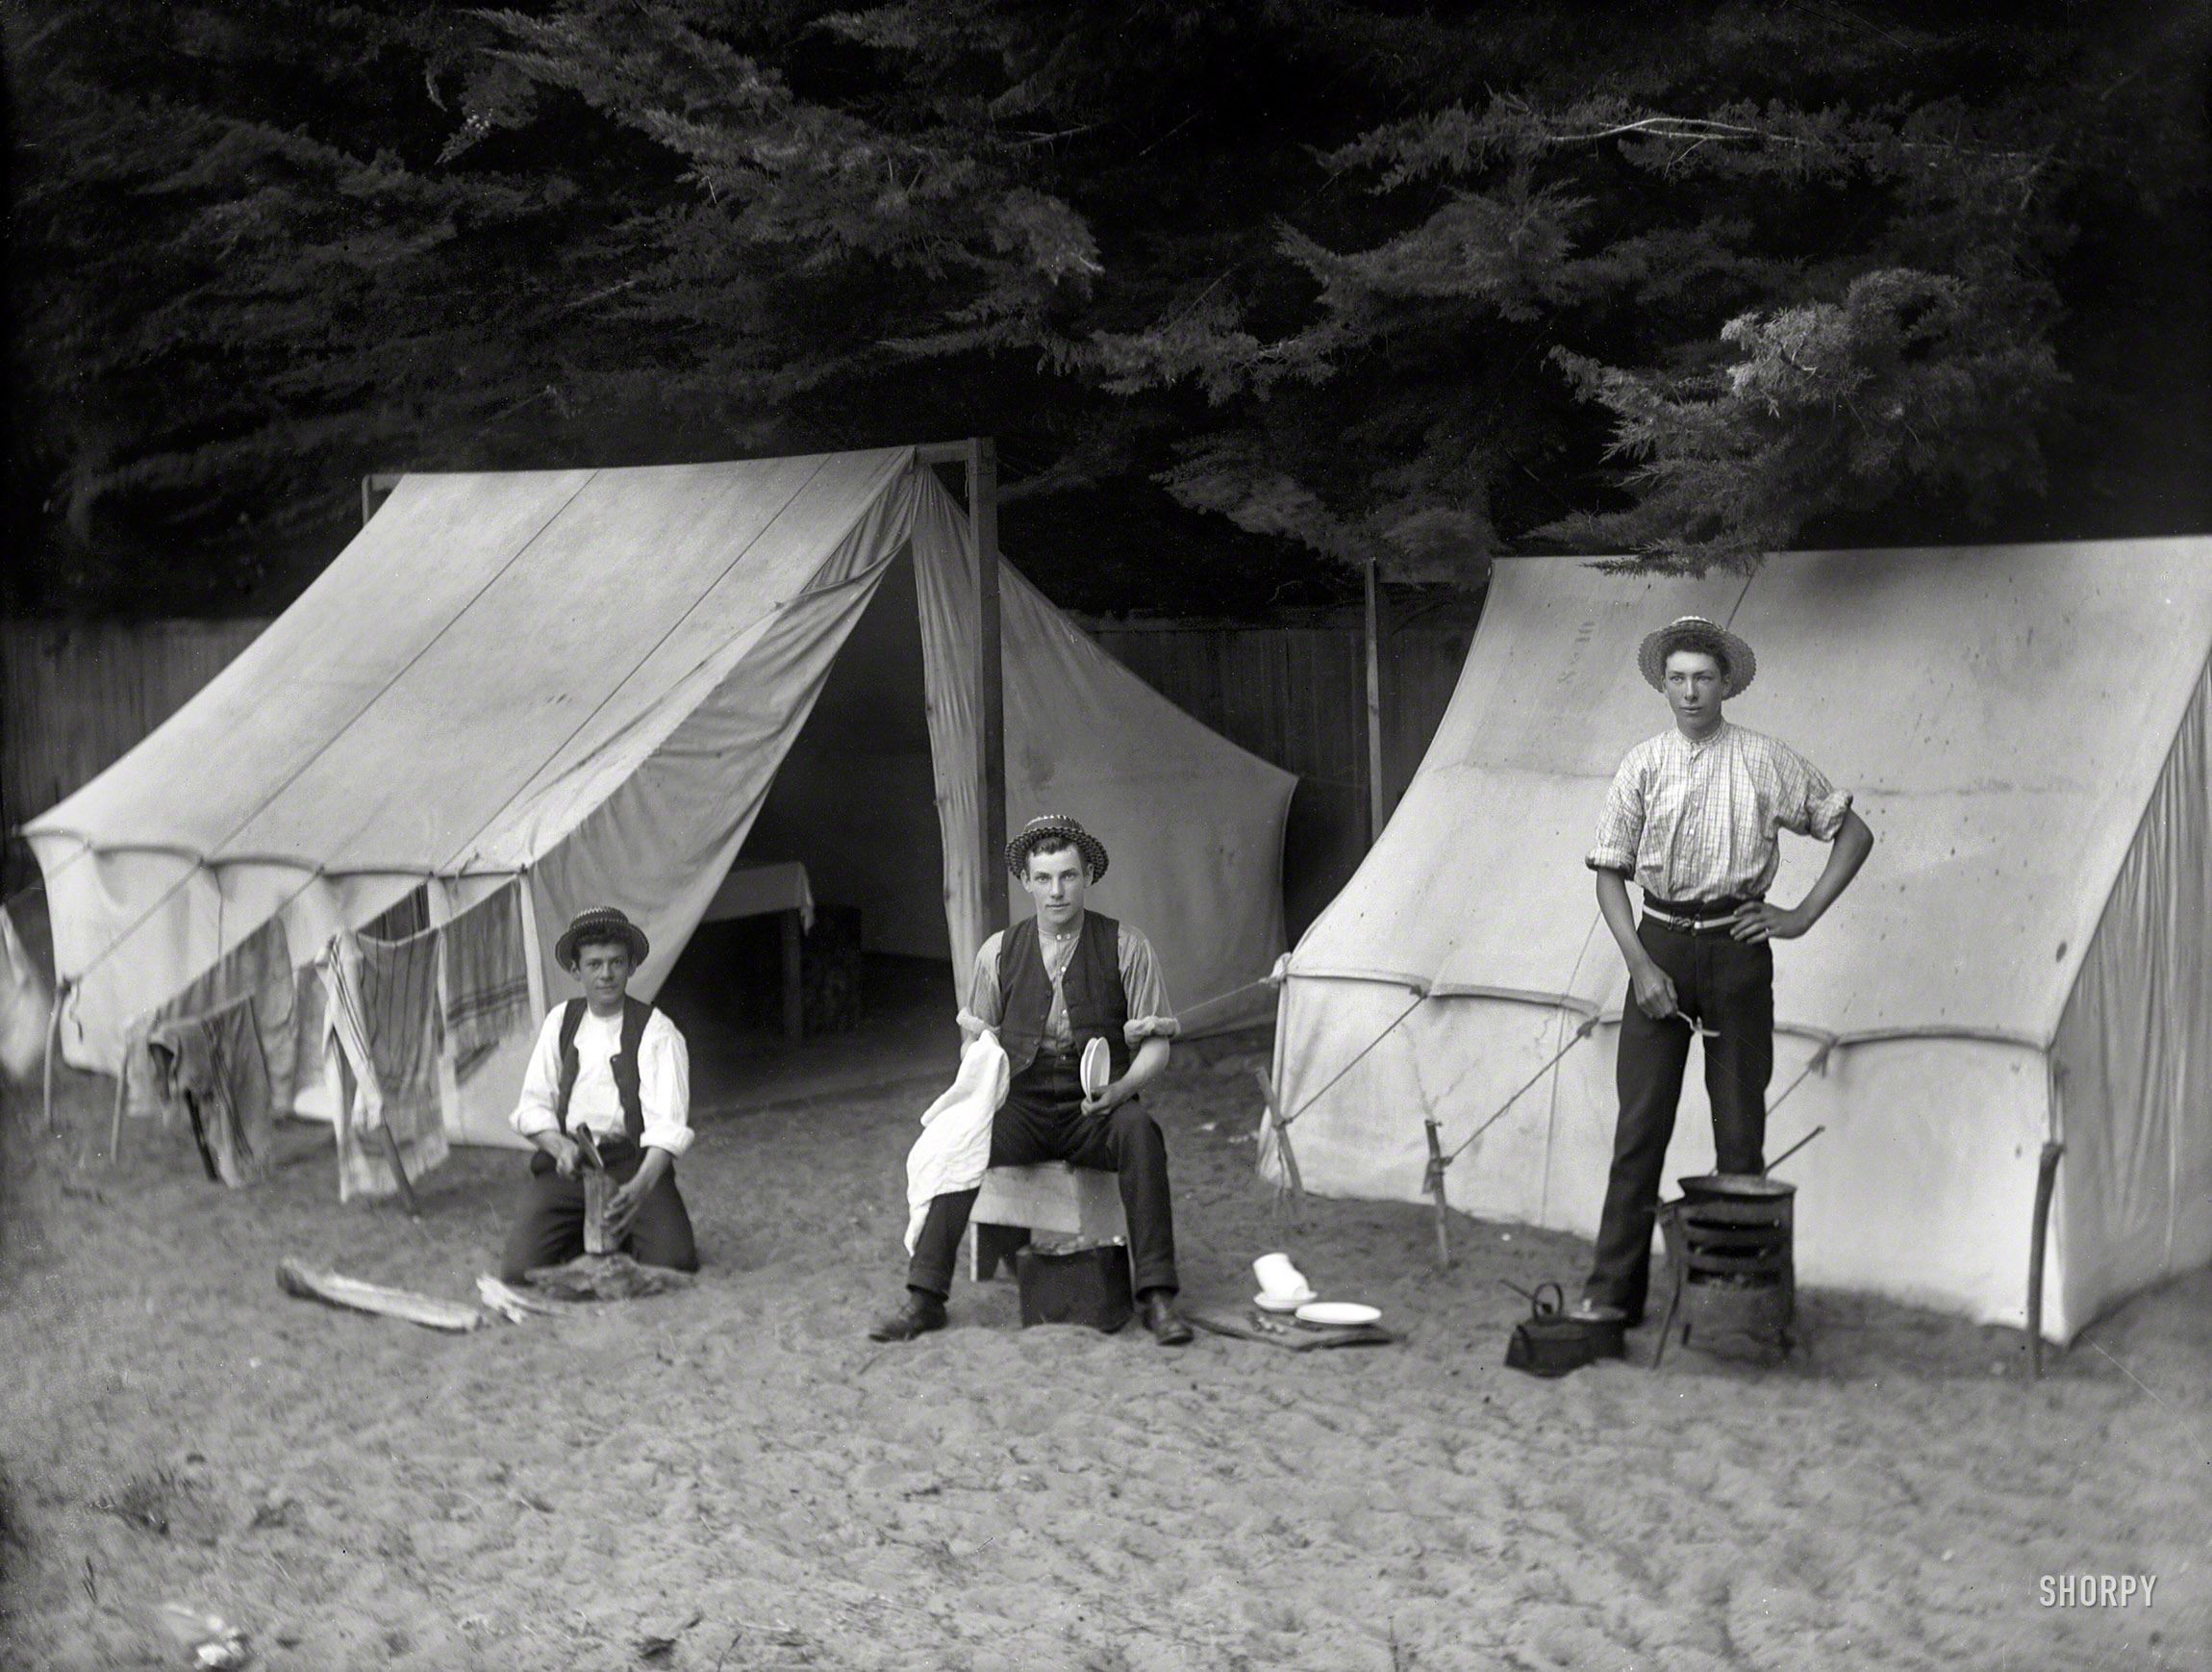 &nbsp; &nbsp; &nbsp; &nbsp; "We are decent lads and would be delighted to have your sister or daughter to tea."
New Zealand circa 1902. "Three men at campsite doing odd jobs, showing one man chopping wood, one man doing dishes and the other man cooking, possibly Christchurch district." Glass negative by Adam Maclay. View full size.